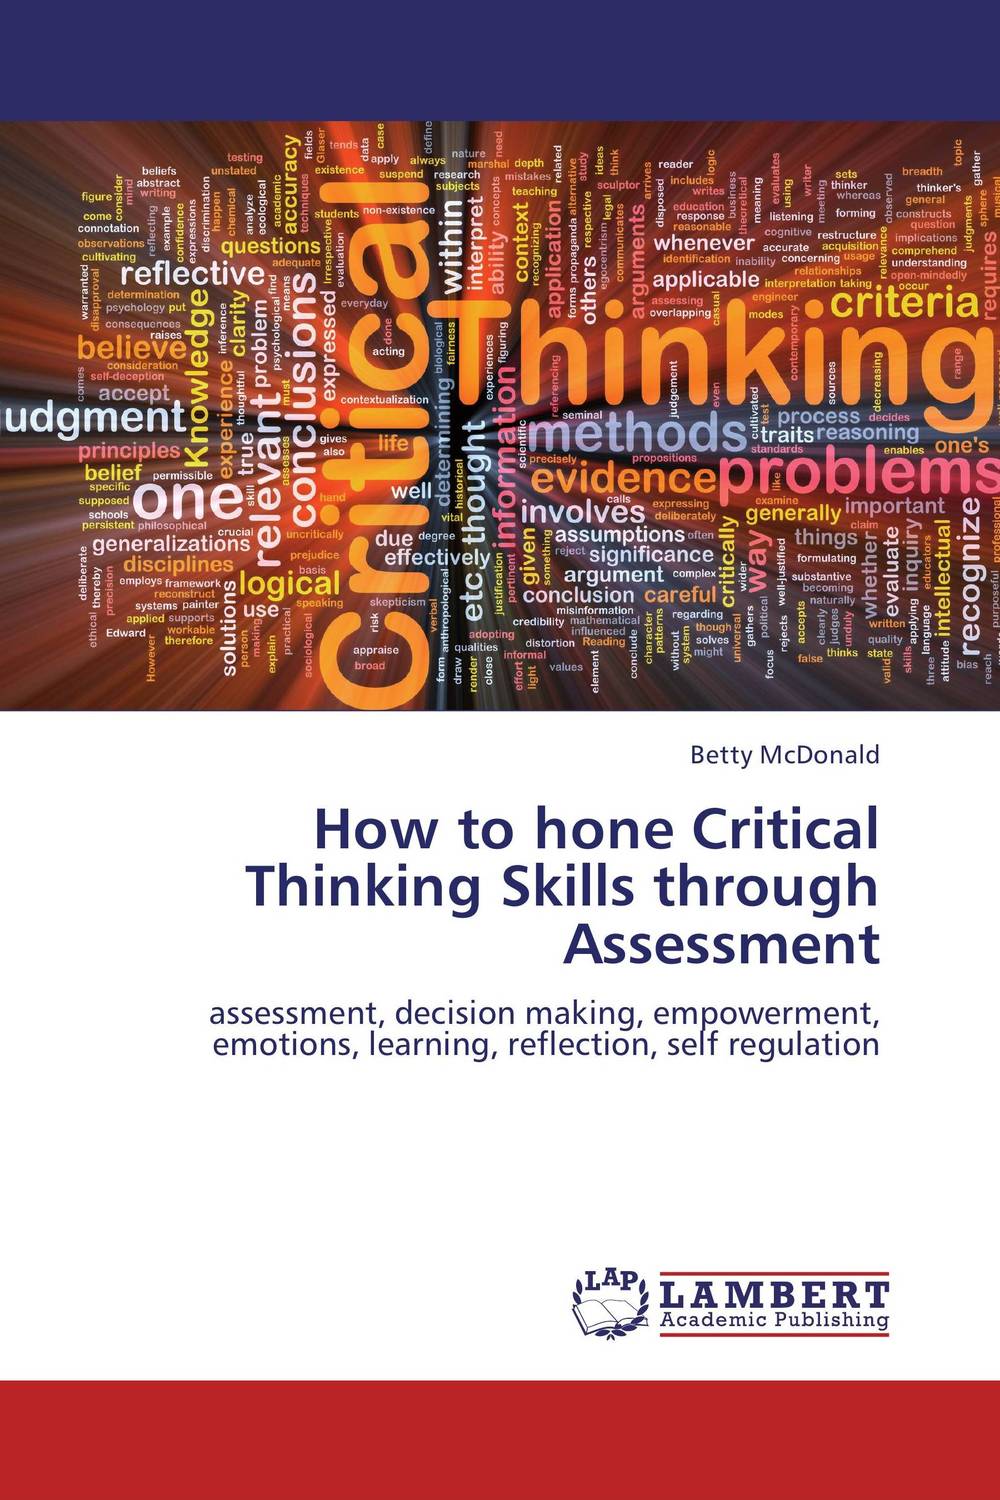 How to hone Critical Thinking Skills through Assessment